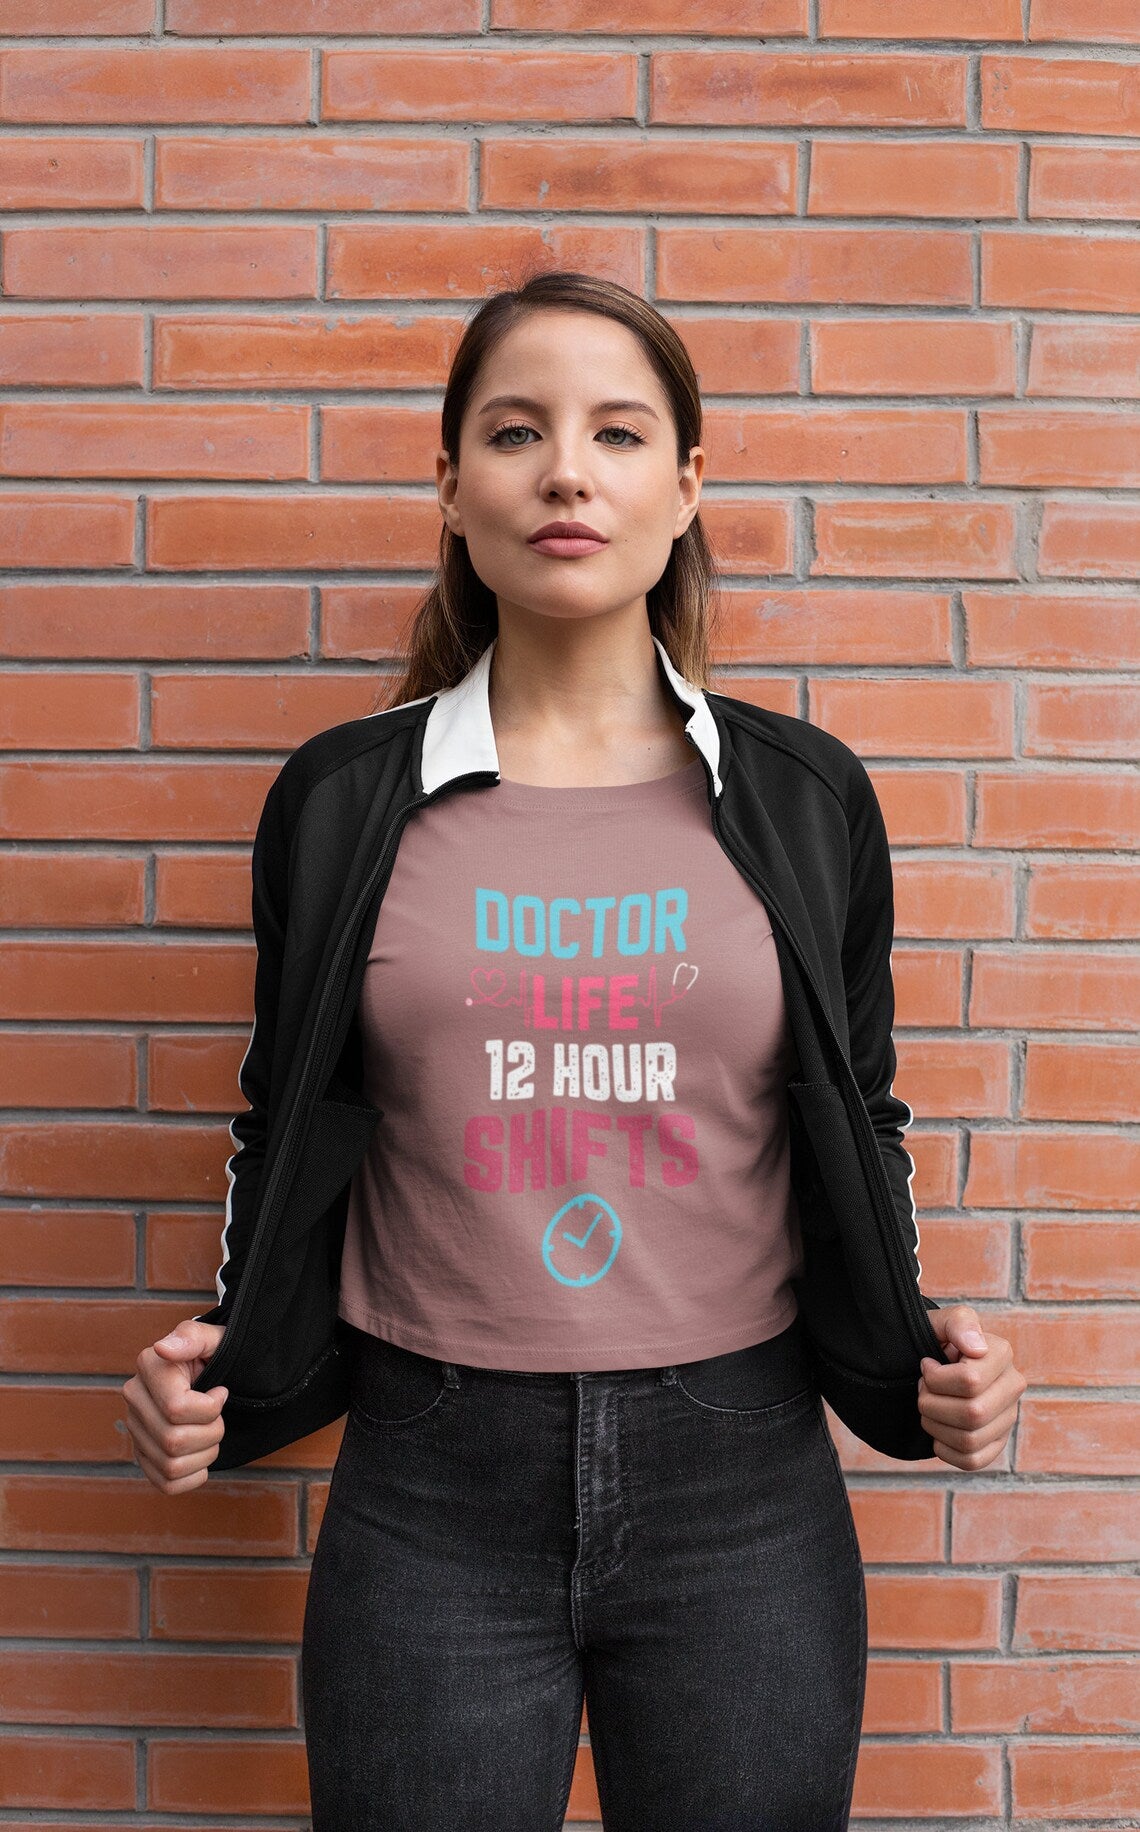 Doctor Life 12 Hour Shifts Women's Flowy Cropped Tee, Doctor shirts, Doctor gift ideas, New Doctor shirt, gift for doctor, Doctor team shirt